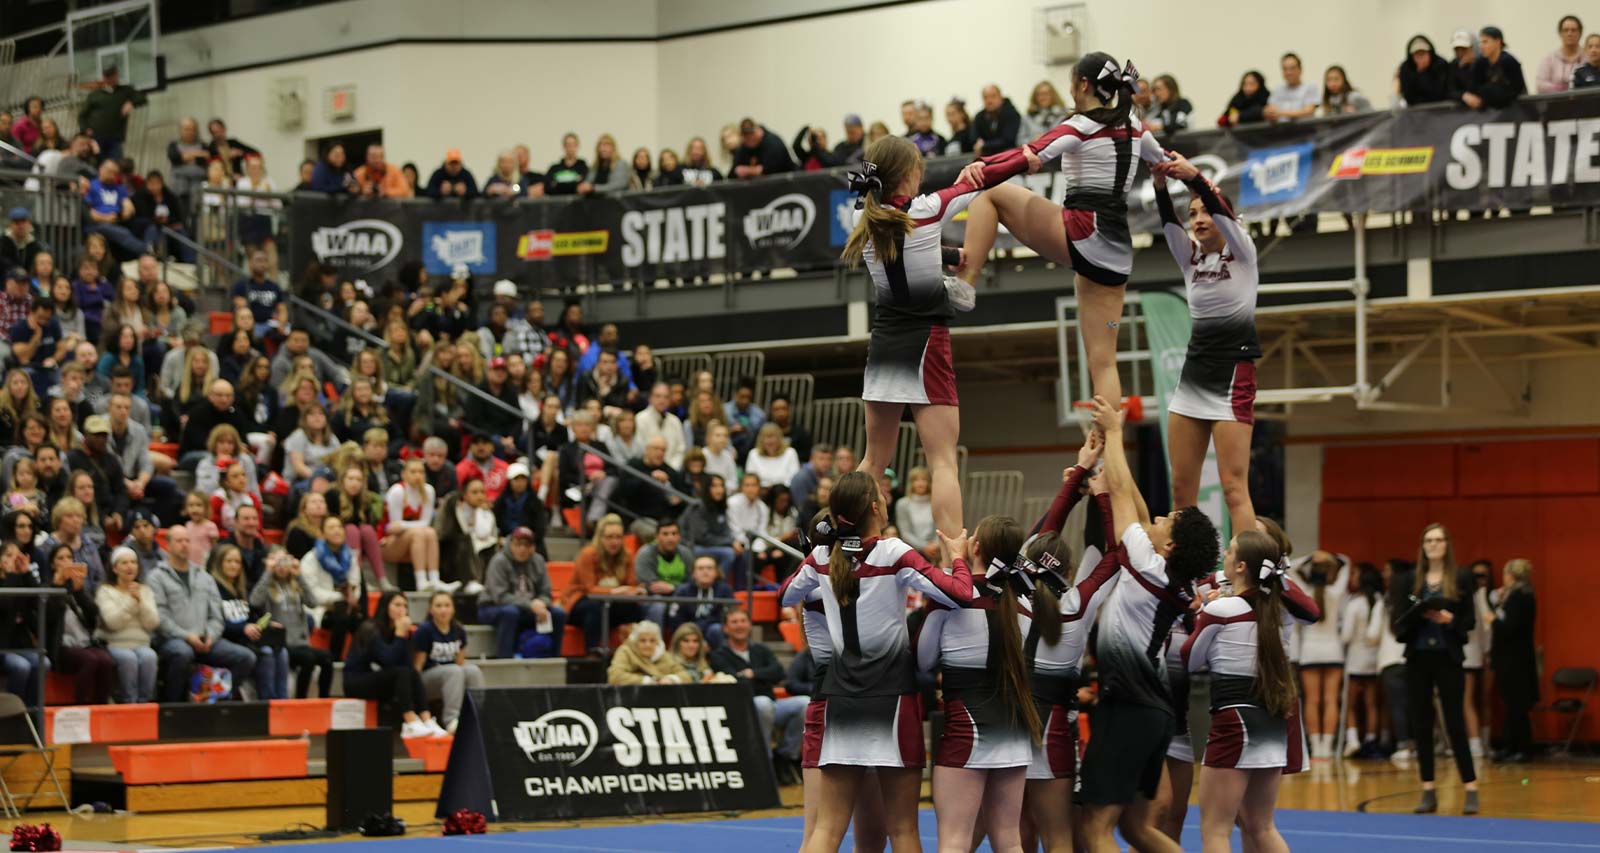 The cheer team wows the crowd at State Championships